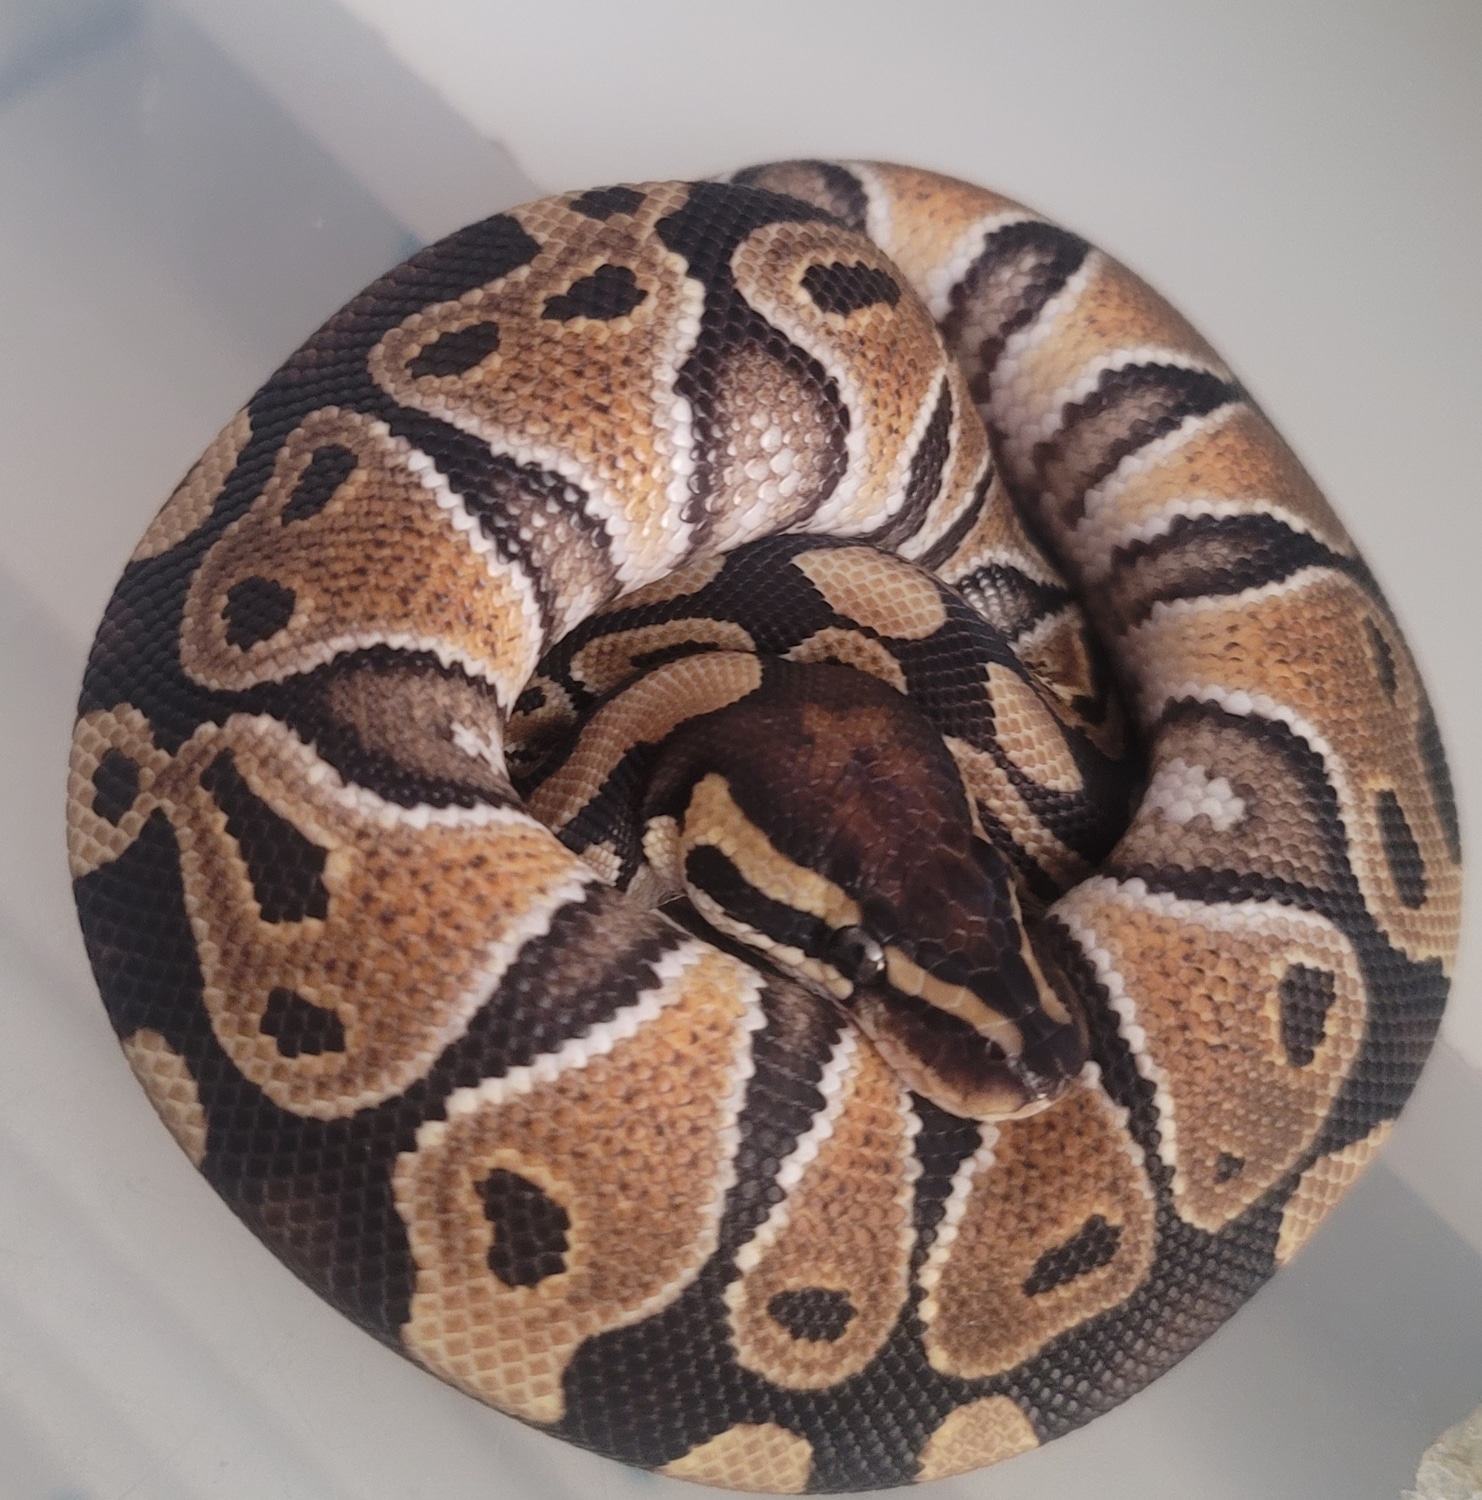 Special Ball Python by R.O.G Reptiles